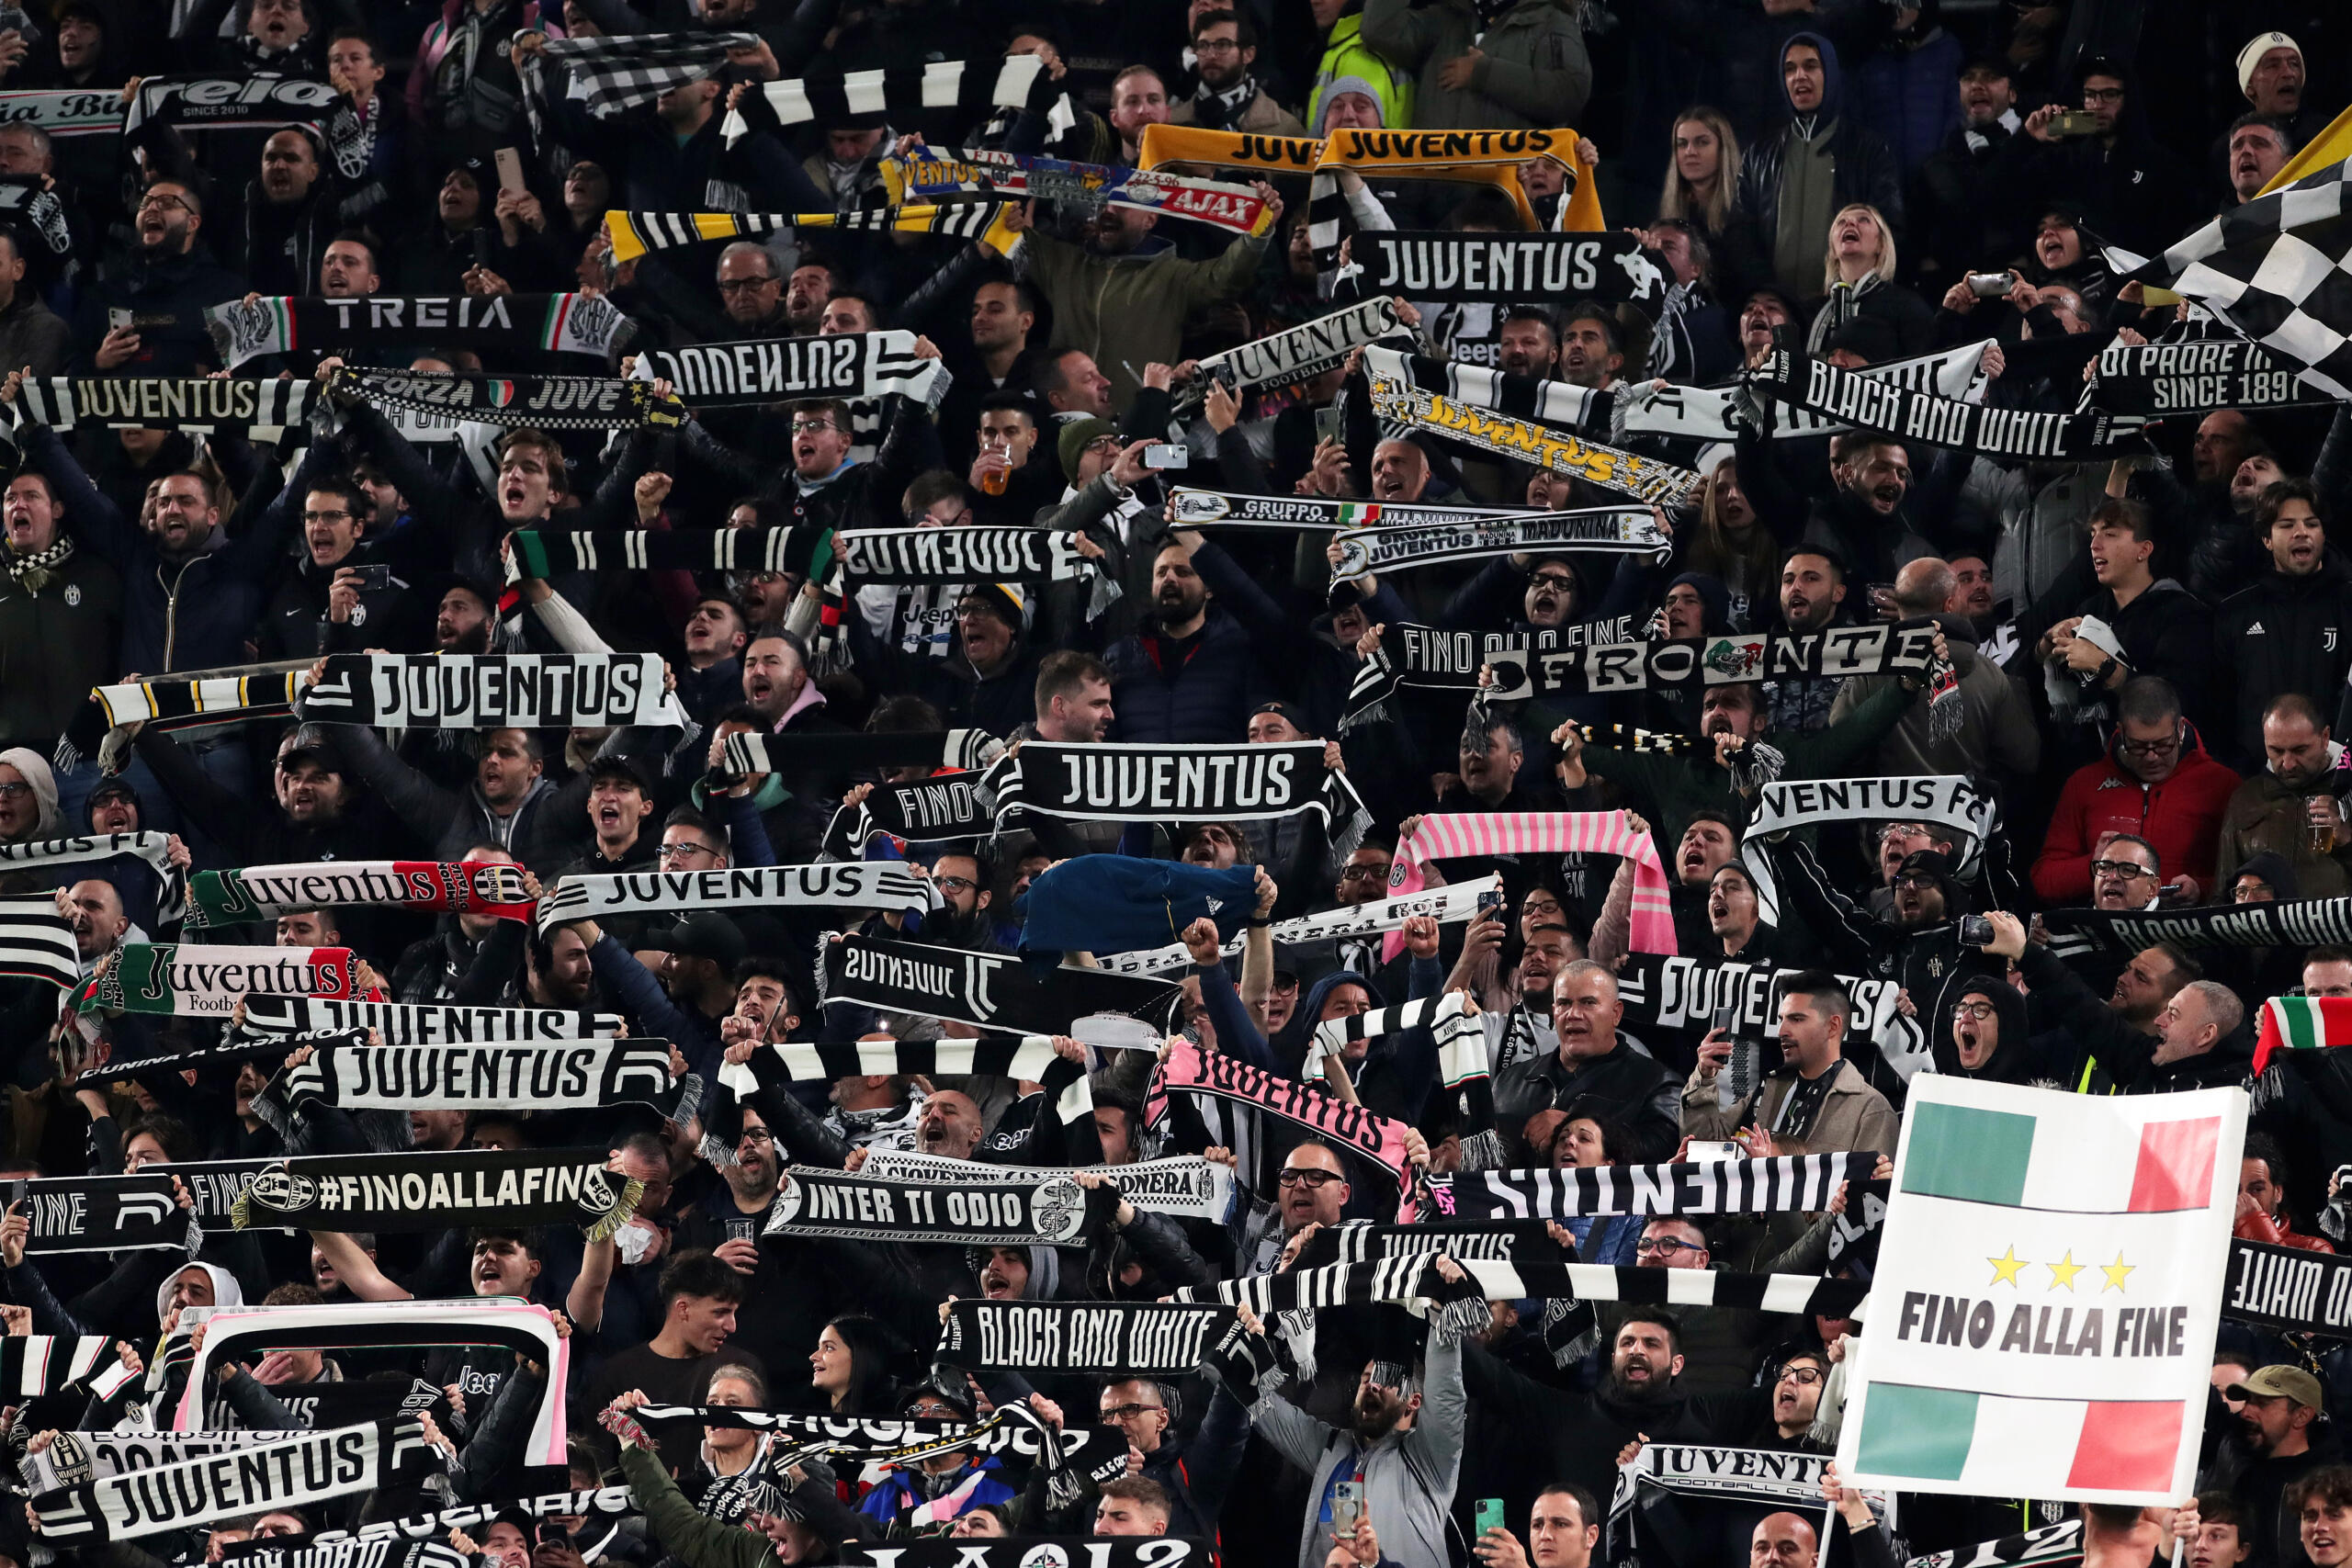 Juventus were helped by the spirited support of the Curva in the recent commanding win over Lazio thanks to the return of the Ultras.